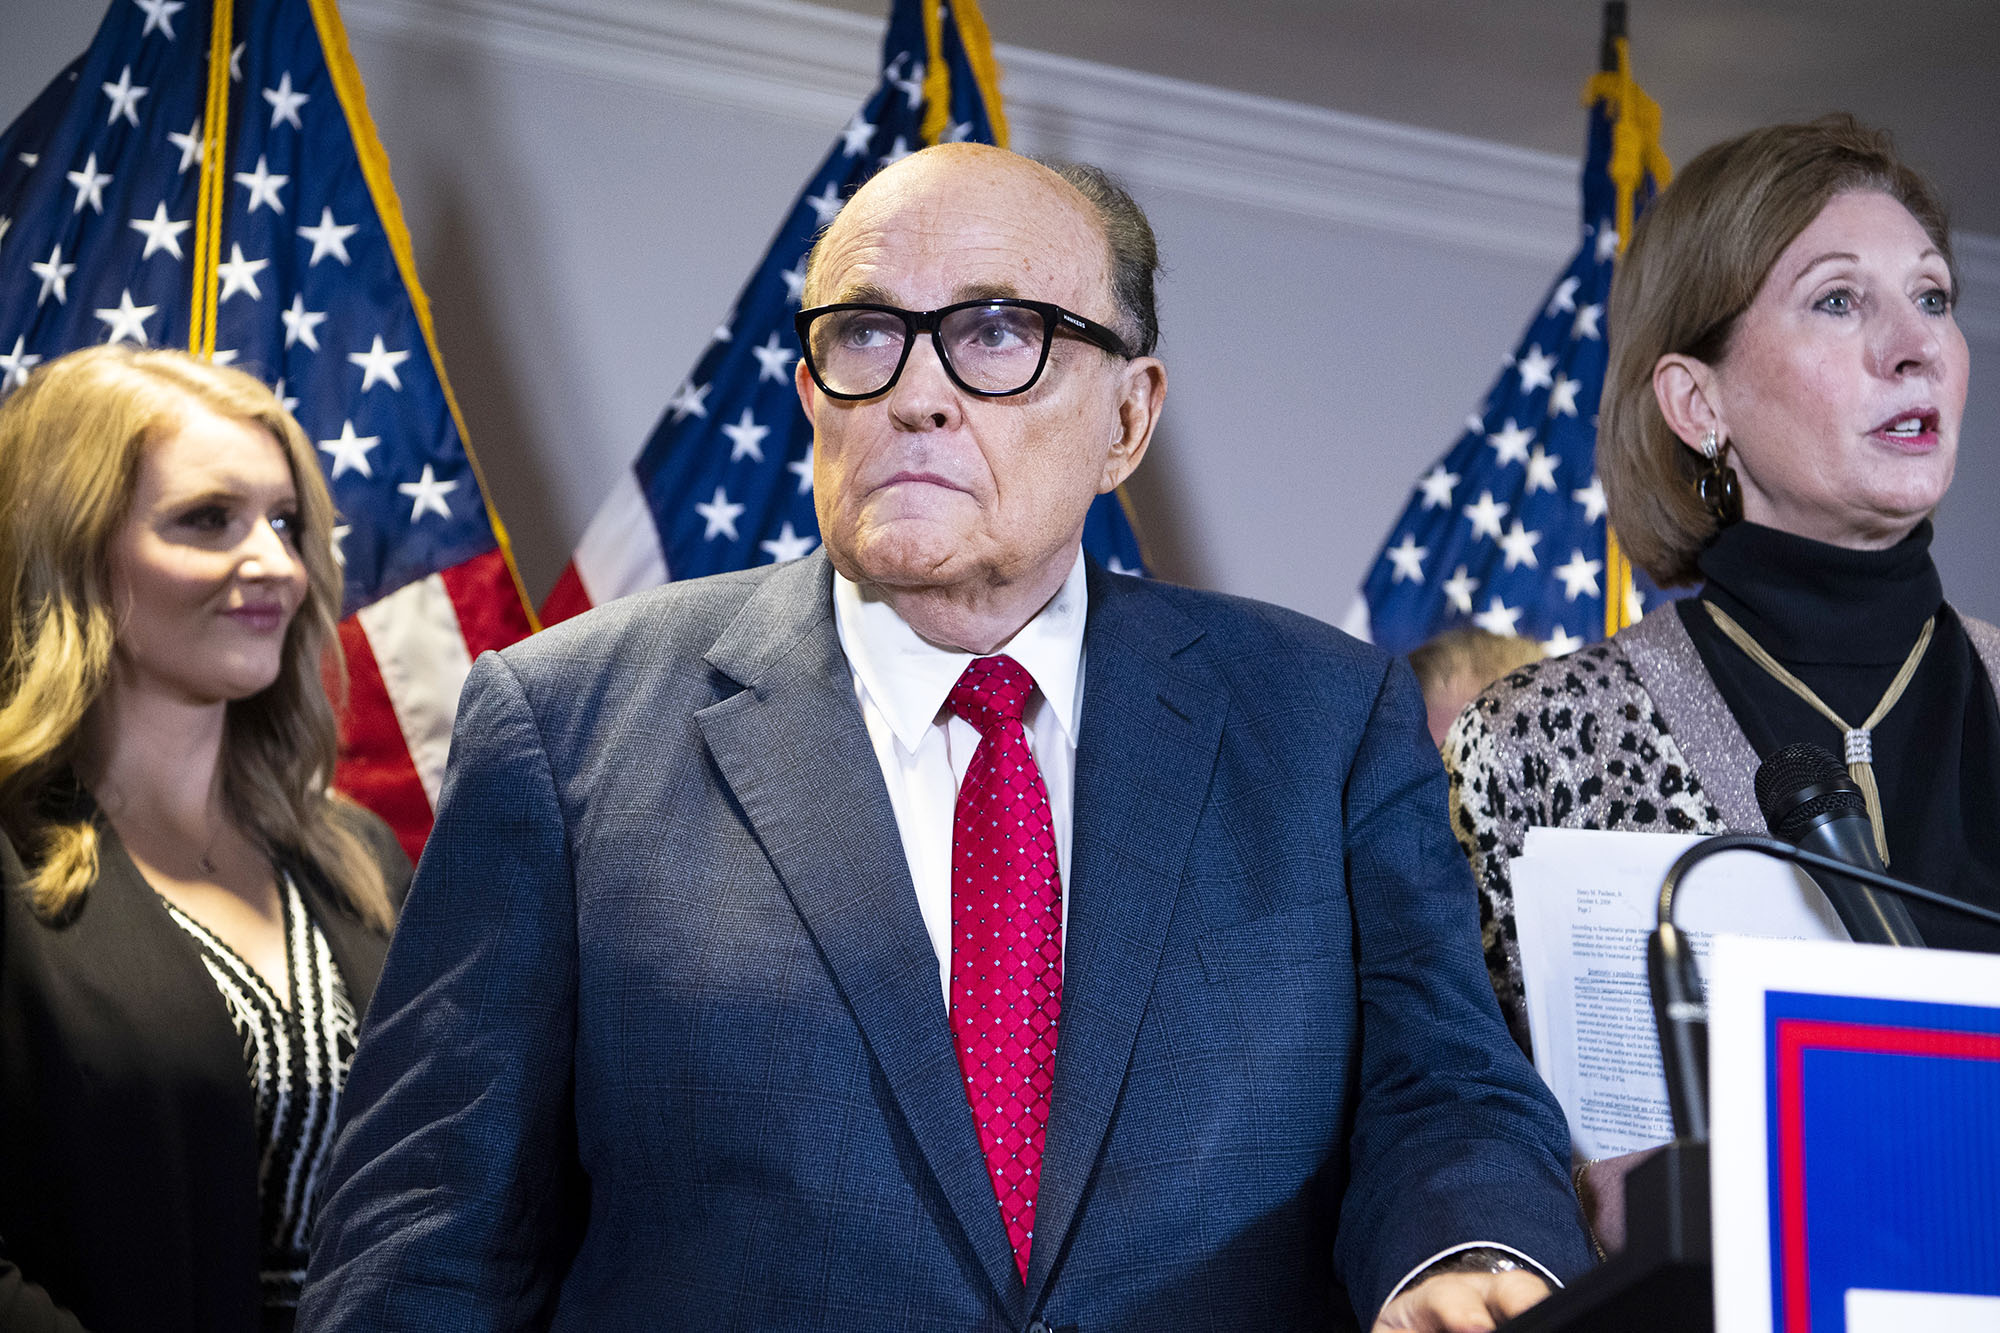 PHOTO: udolph Giuliani conducts a news conference at the Republican National Committee in Washington, Nov. 19, 2020.